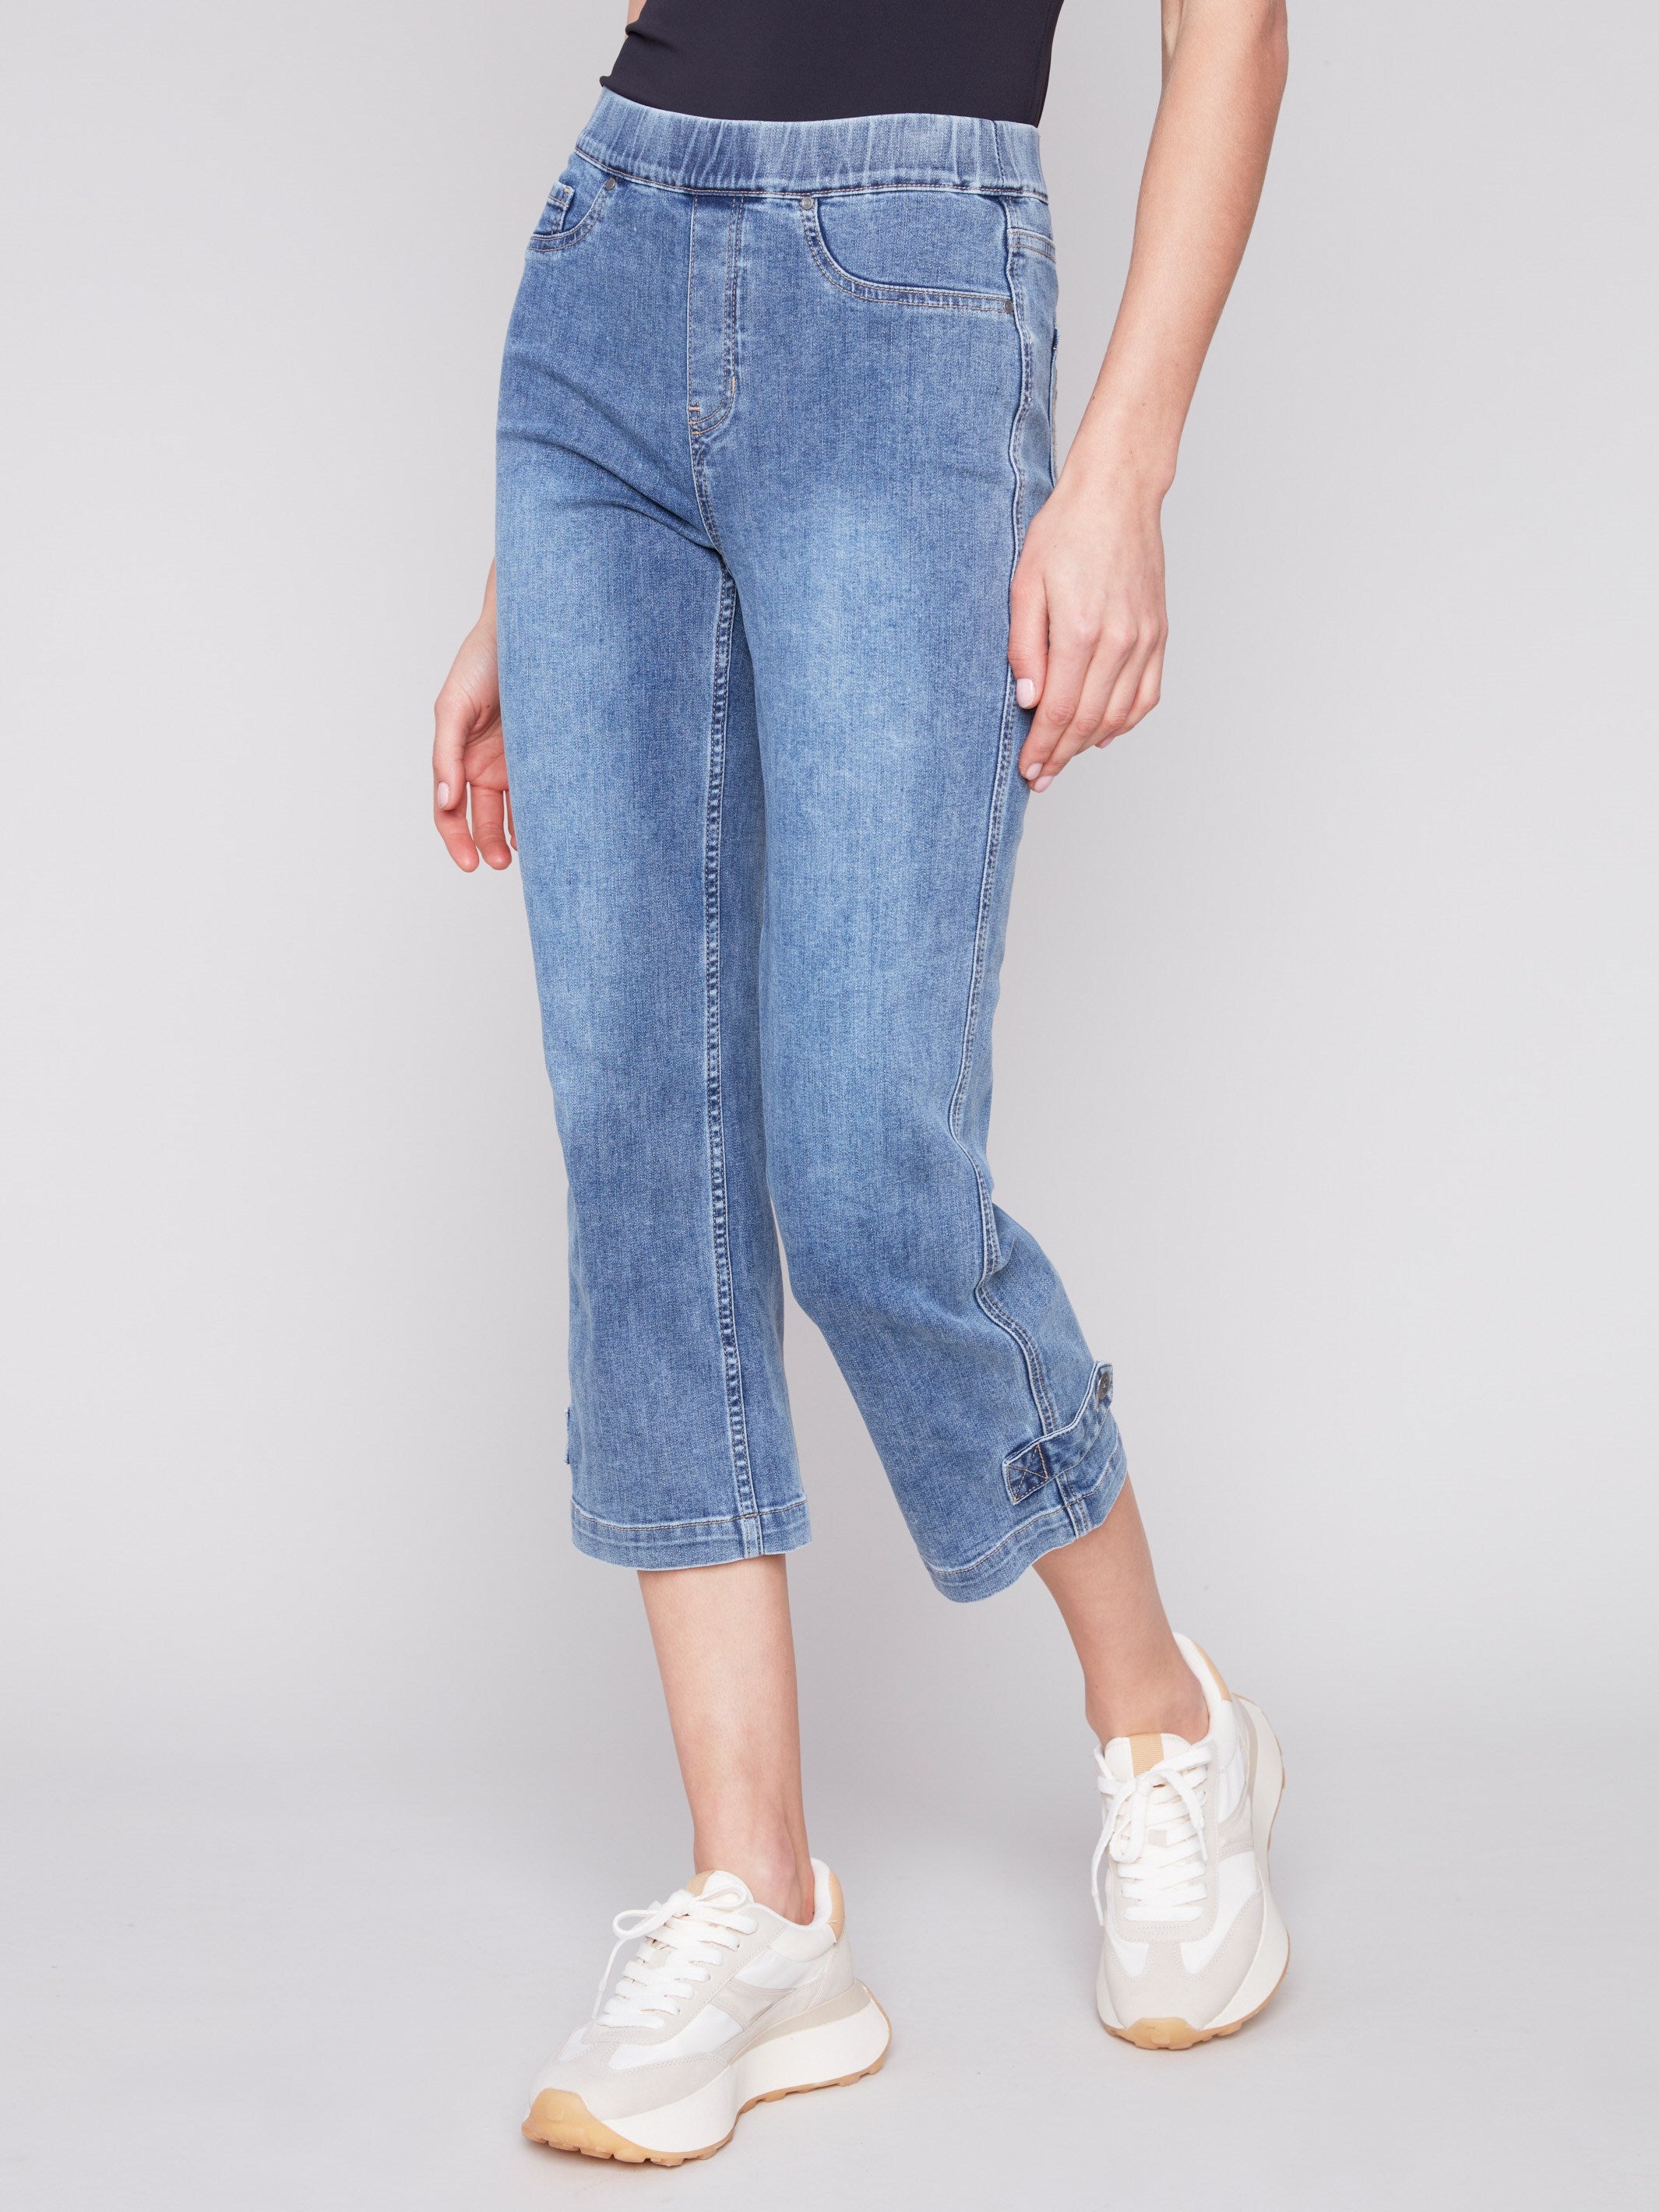 Cropped Pull-On Jeans with Hem Tab - Medium Blue - Charlie B Collection Canada - Image 3